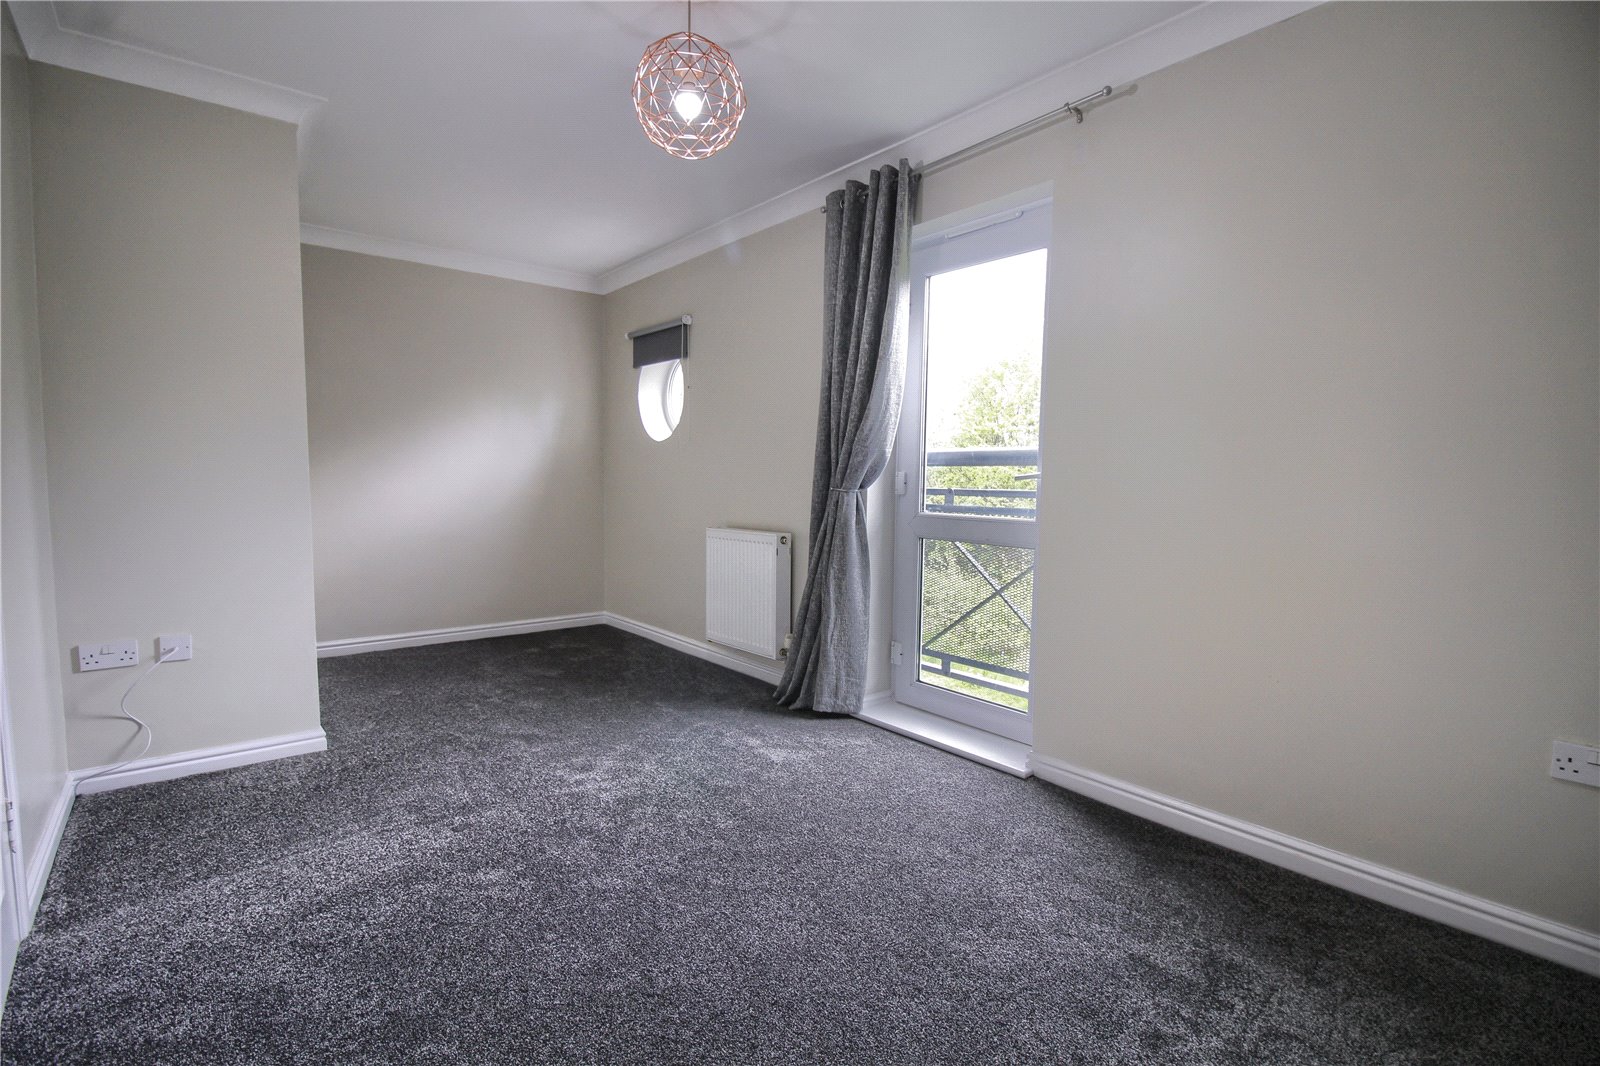 2 bed apartment to rent in Brusselton Court, Stockton-on-Tees 2